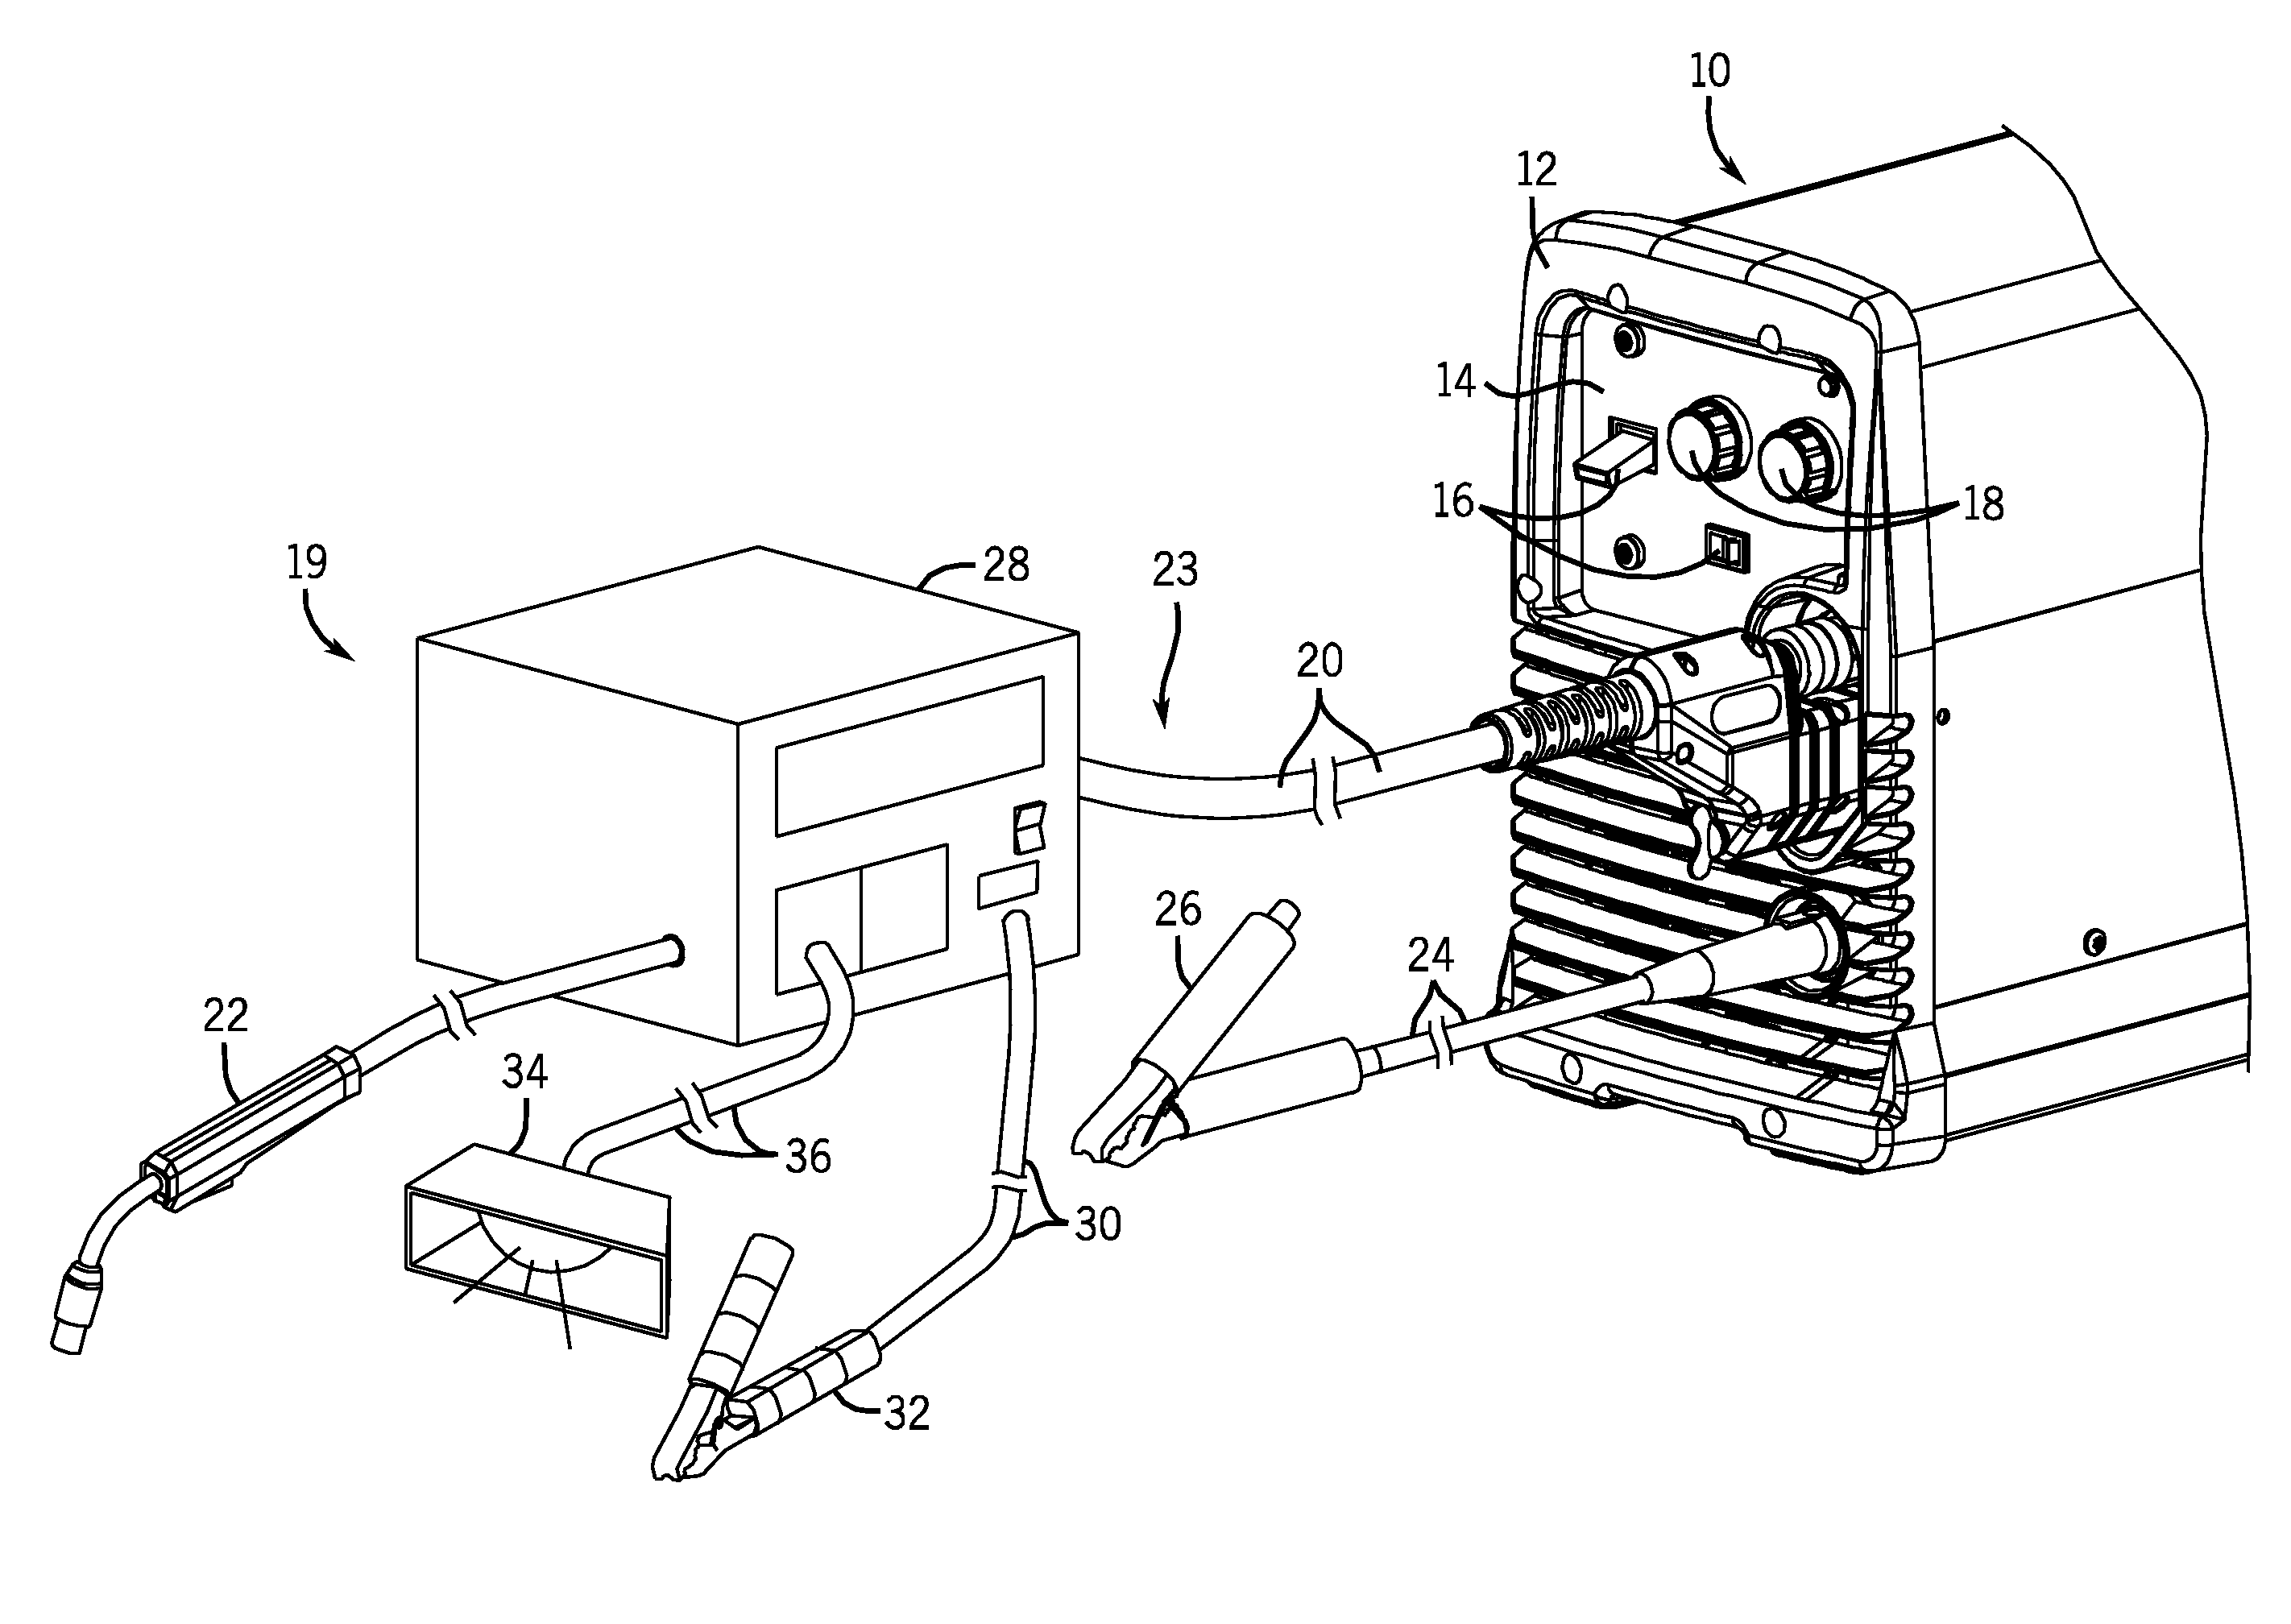 Welding power to auxiliary power conversion system and method